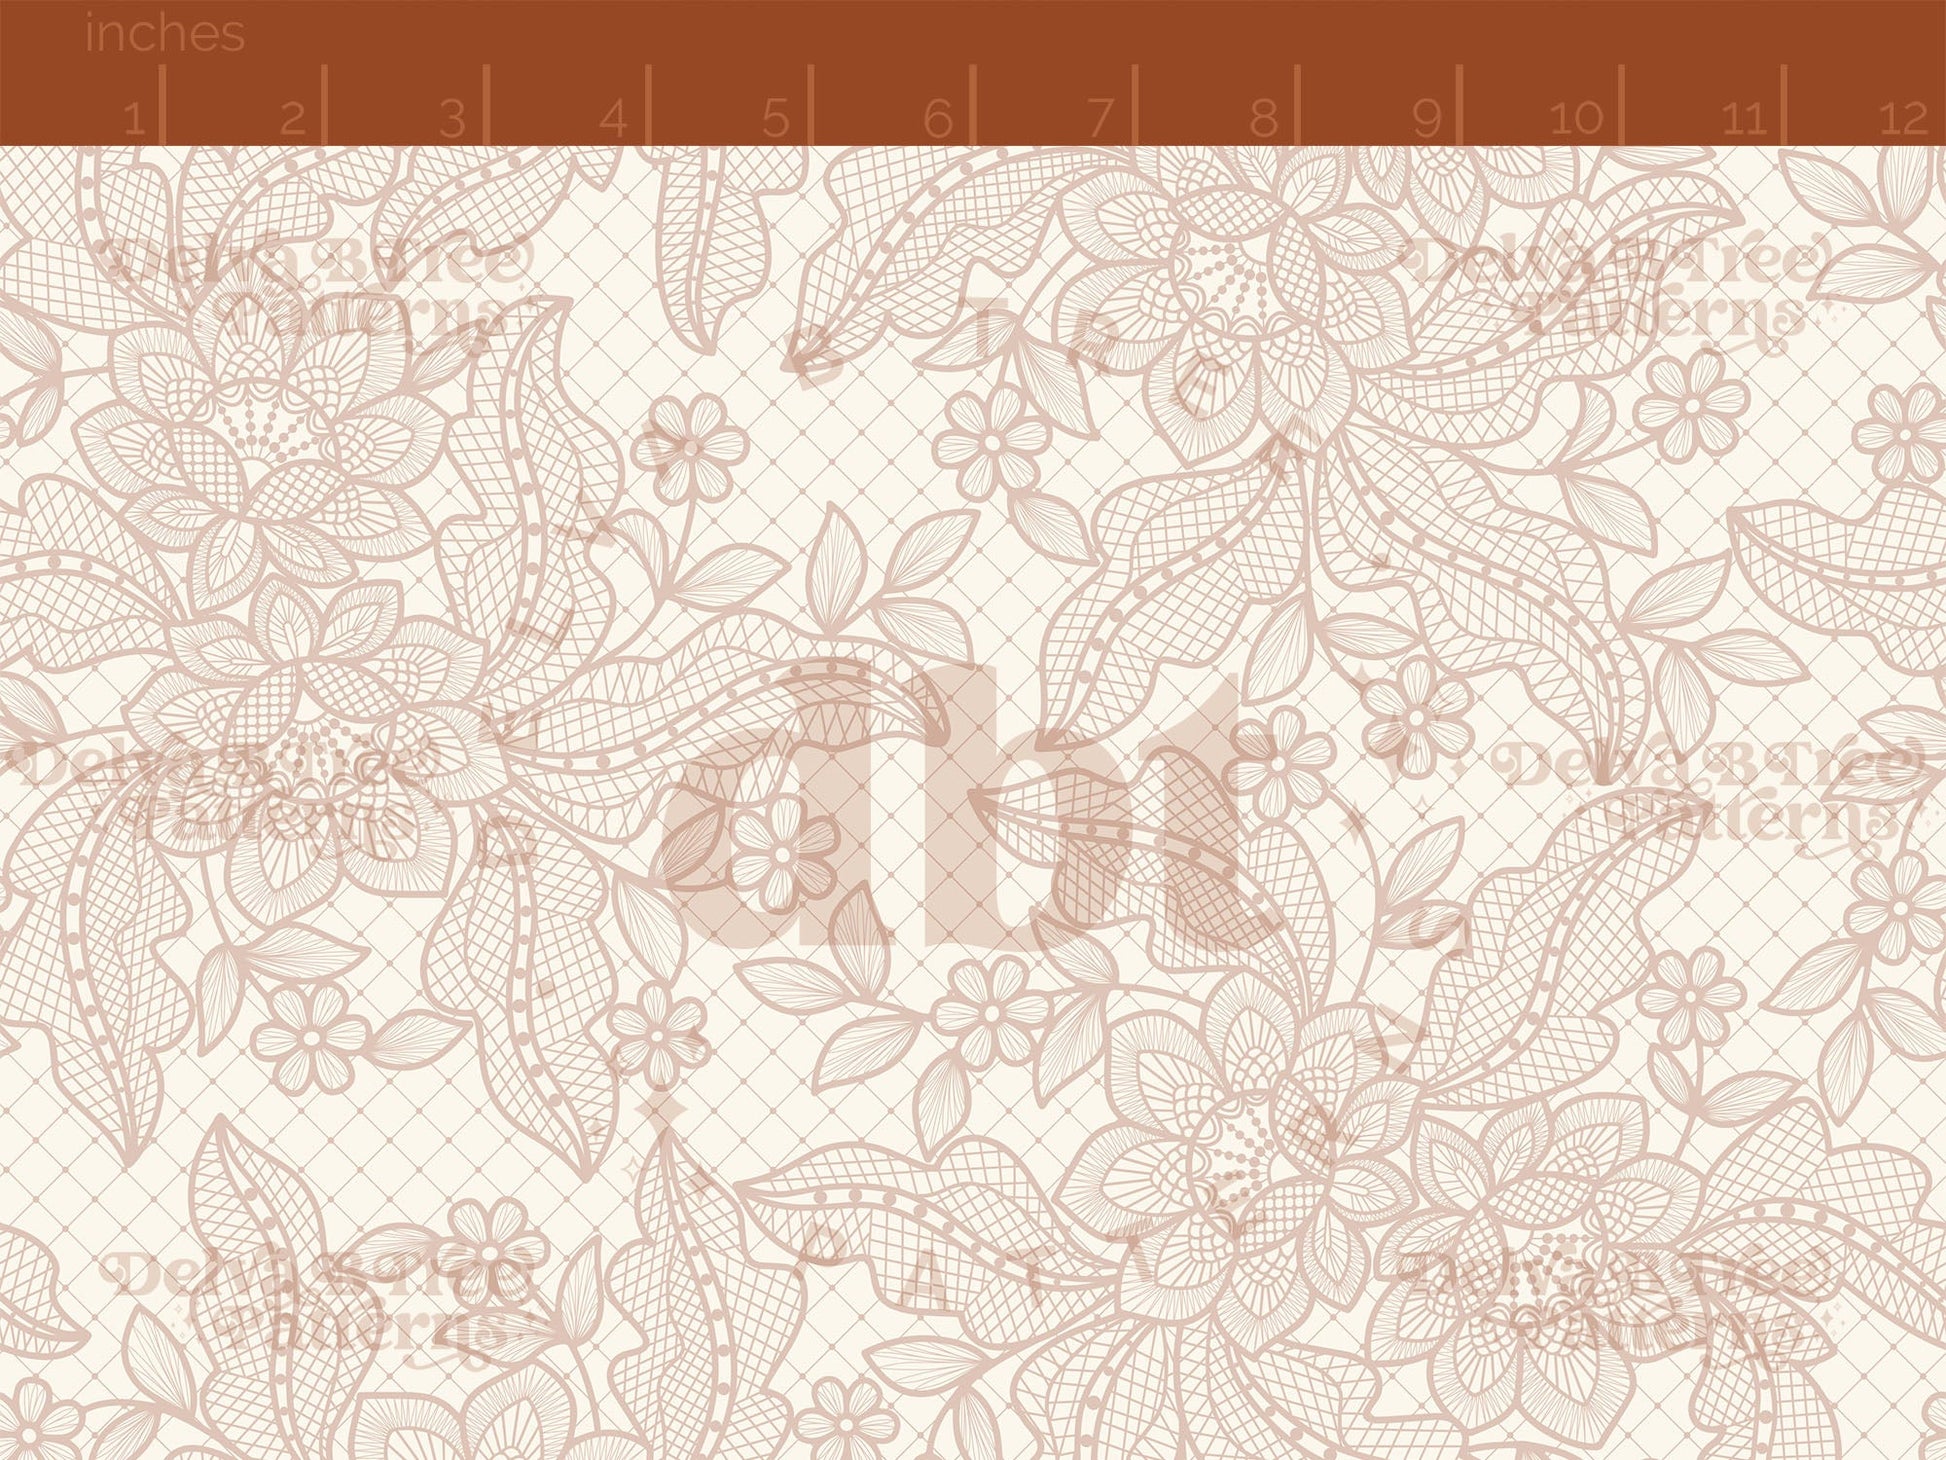 Blush Pink flowers, leaves and faux lace netting on an off white / ivory / cream background seamless pattern scale digital file for small shops that make handmade products in small batches.